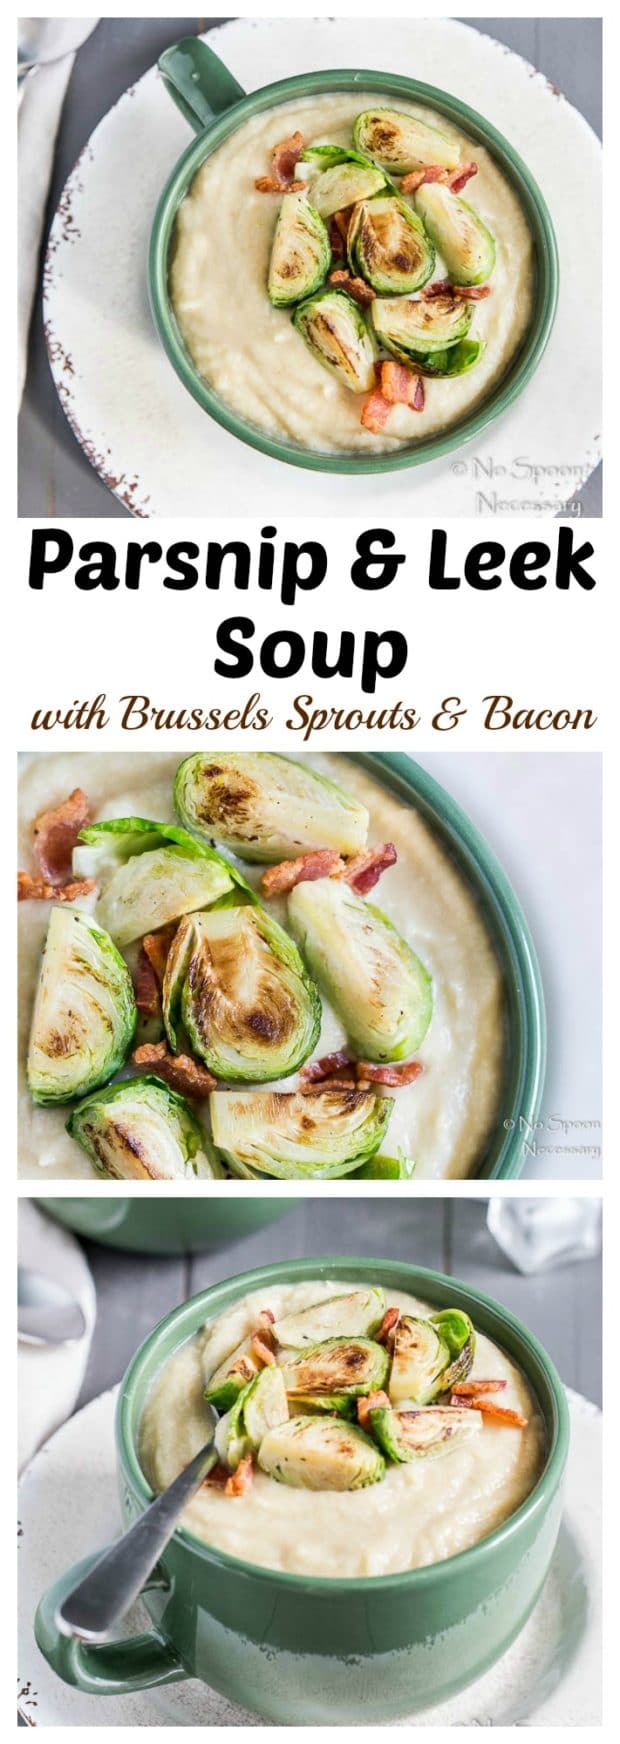 Parsnip & Leek Soup with Brussels Sprouts & Bacon